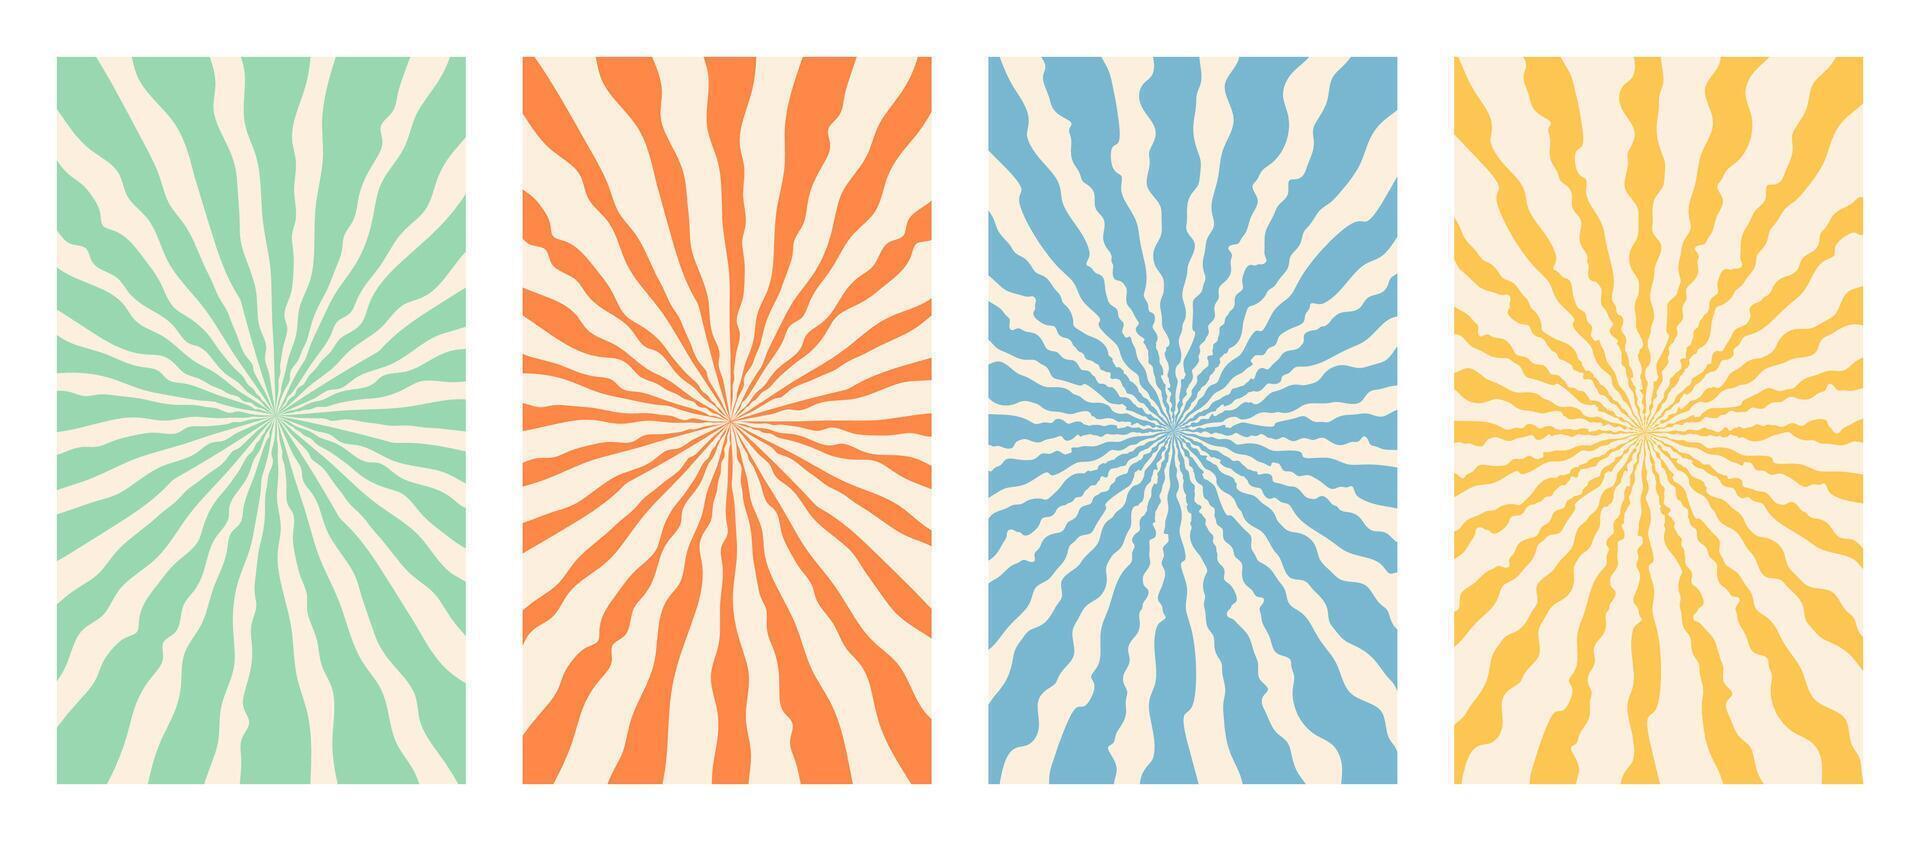 Groovy hippie 70s abstract background backgrounds-03 vector